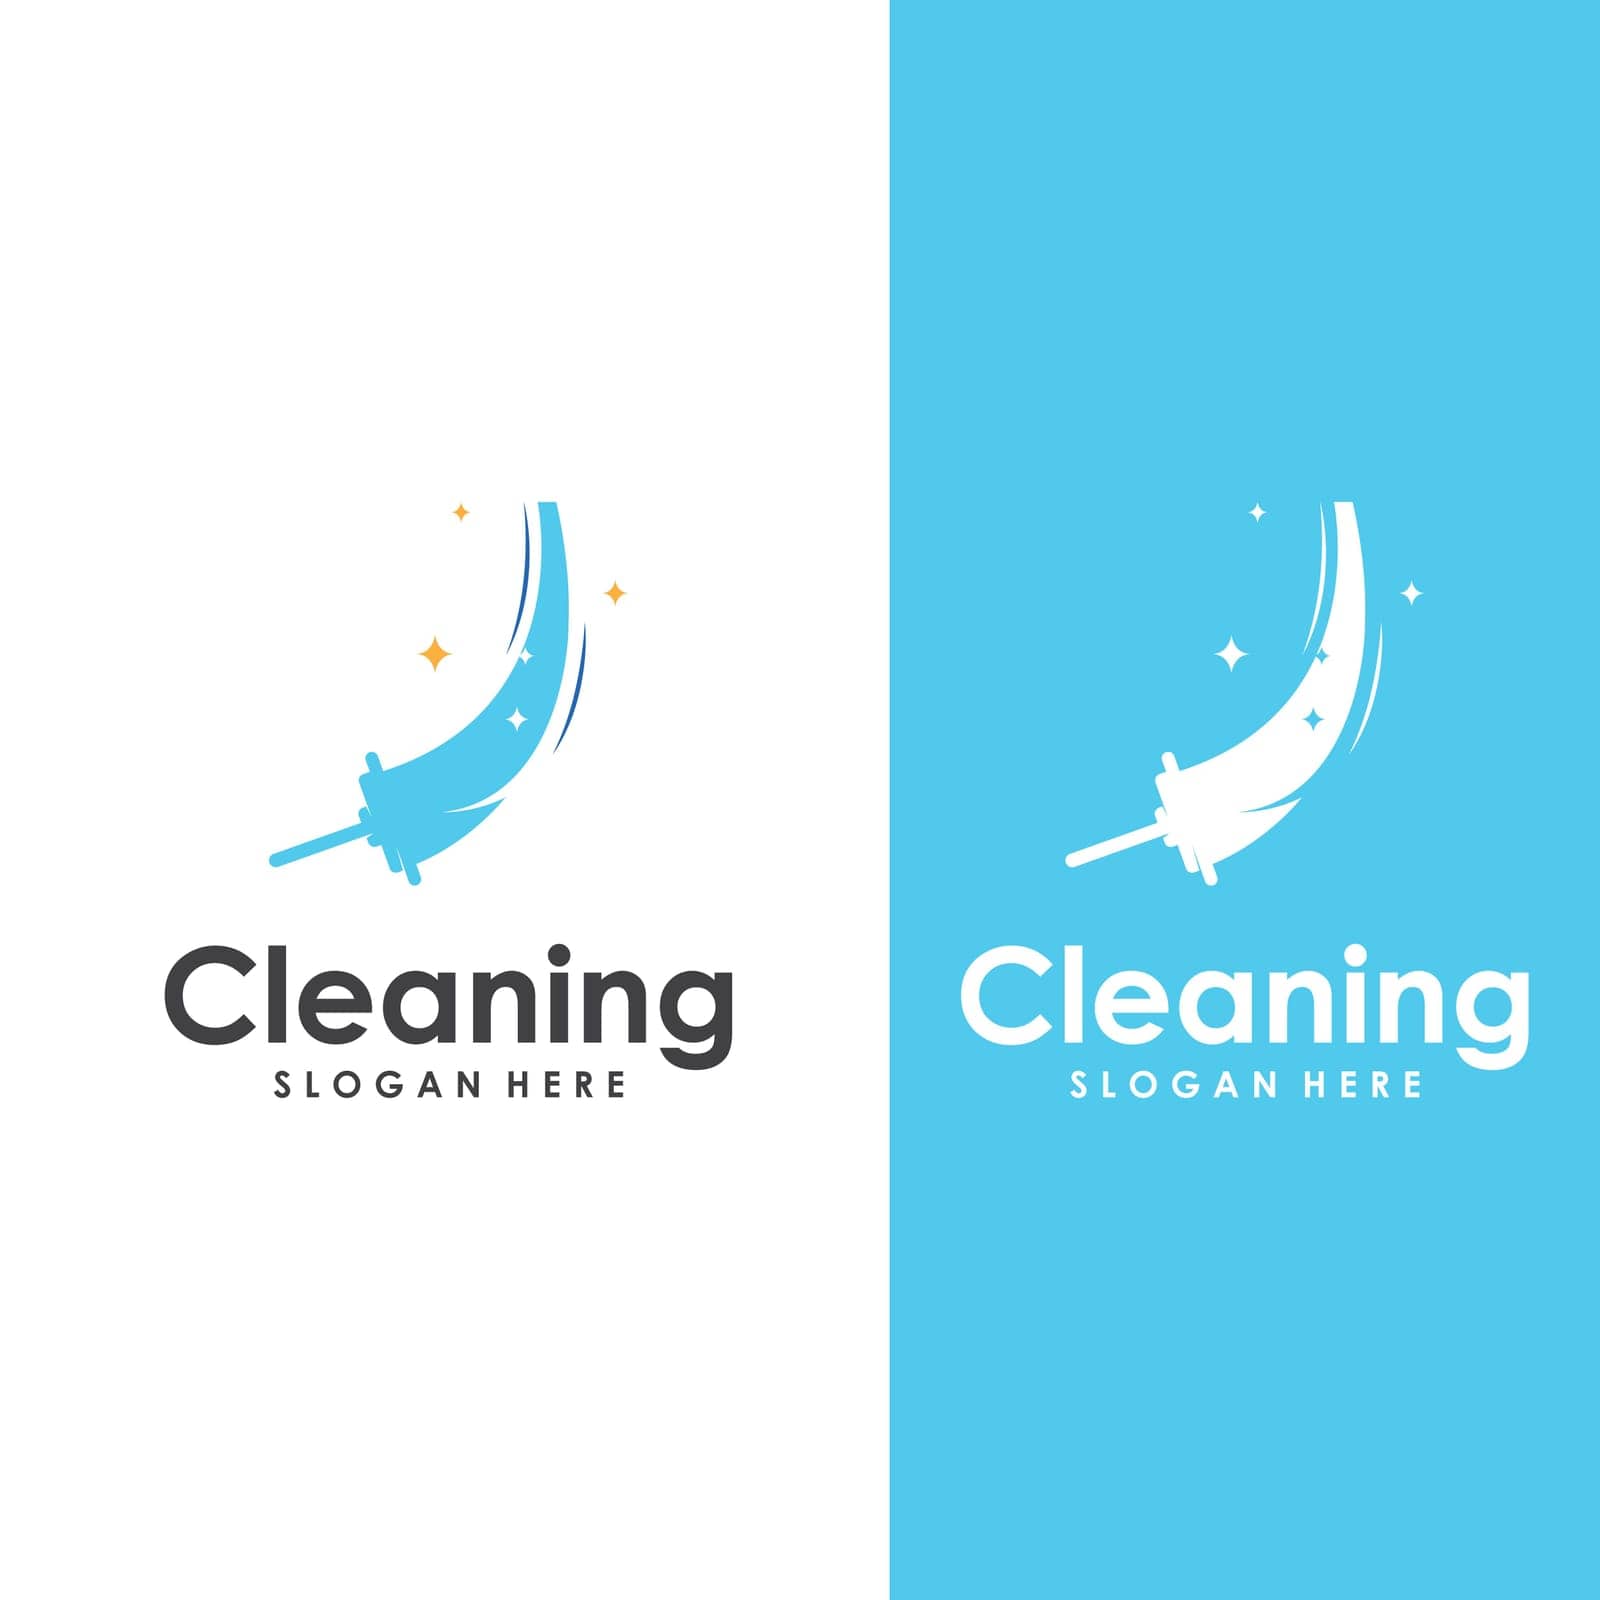 Cleaning logo, cleaning protection logo and house cleaning logo.With a template illustration vector design concept. by Mrsongrphc